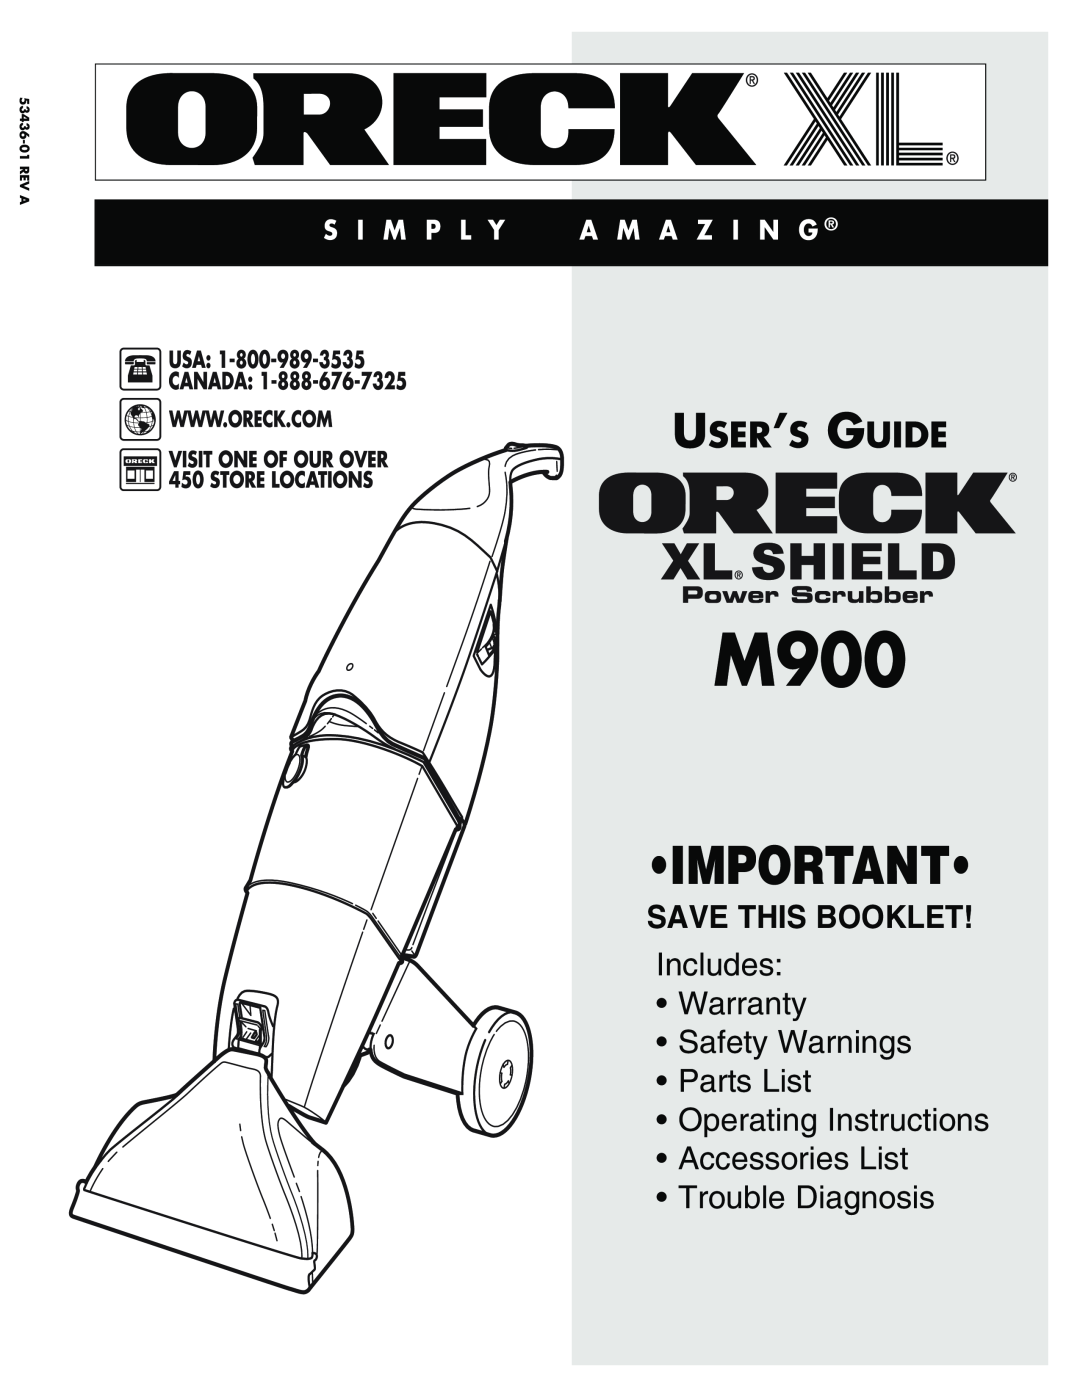 Oreck M900 warranty User’S Guide, Save This Booklet, Includes Warranty Safety Warnings Parts List Operating Instructions 